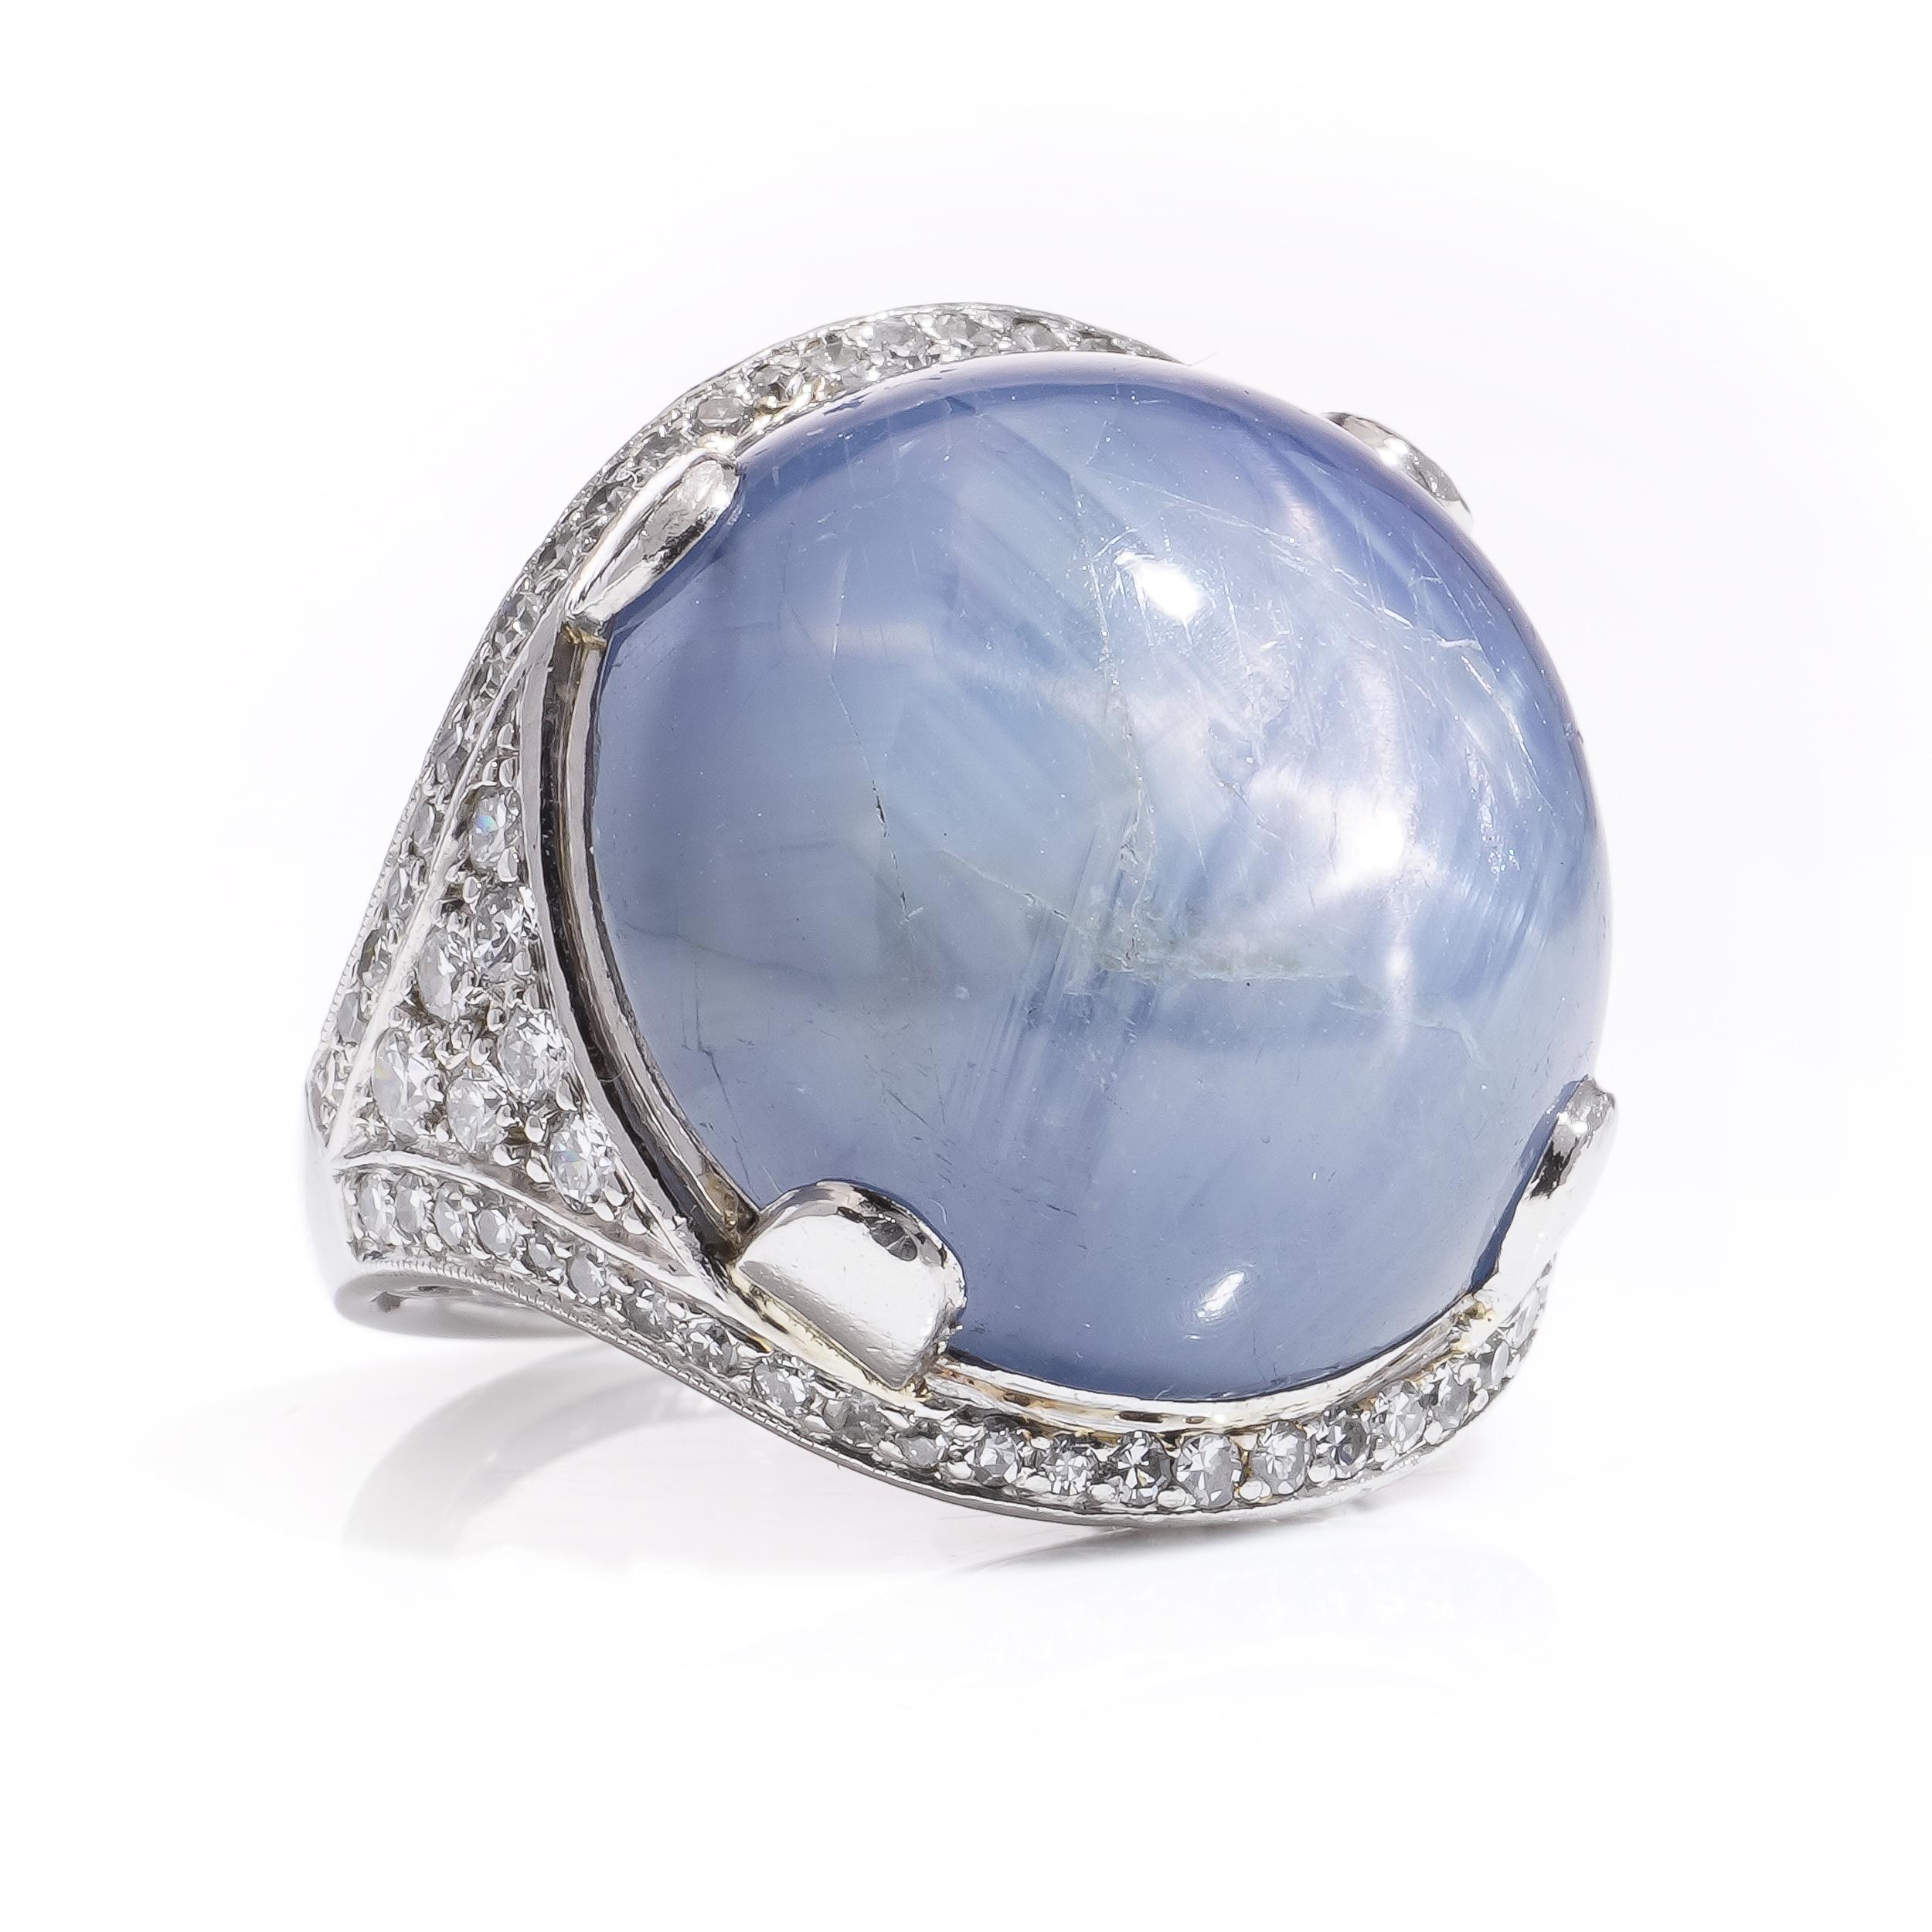 Platinum ladies' dome ring with 46 cts. of round natural cabochon sapphire For Sale 1